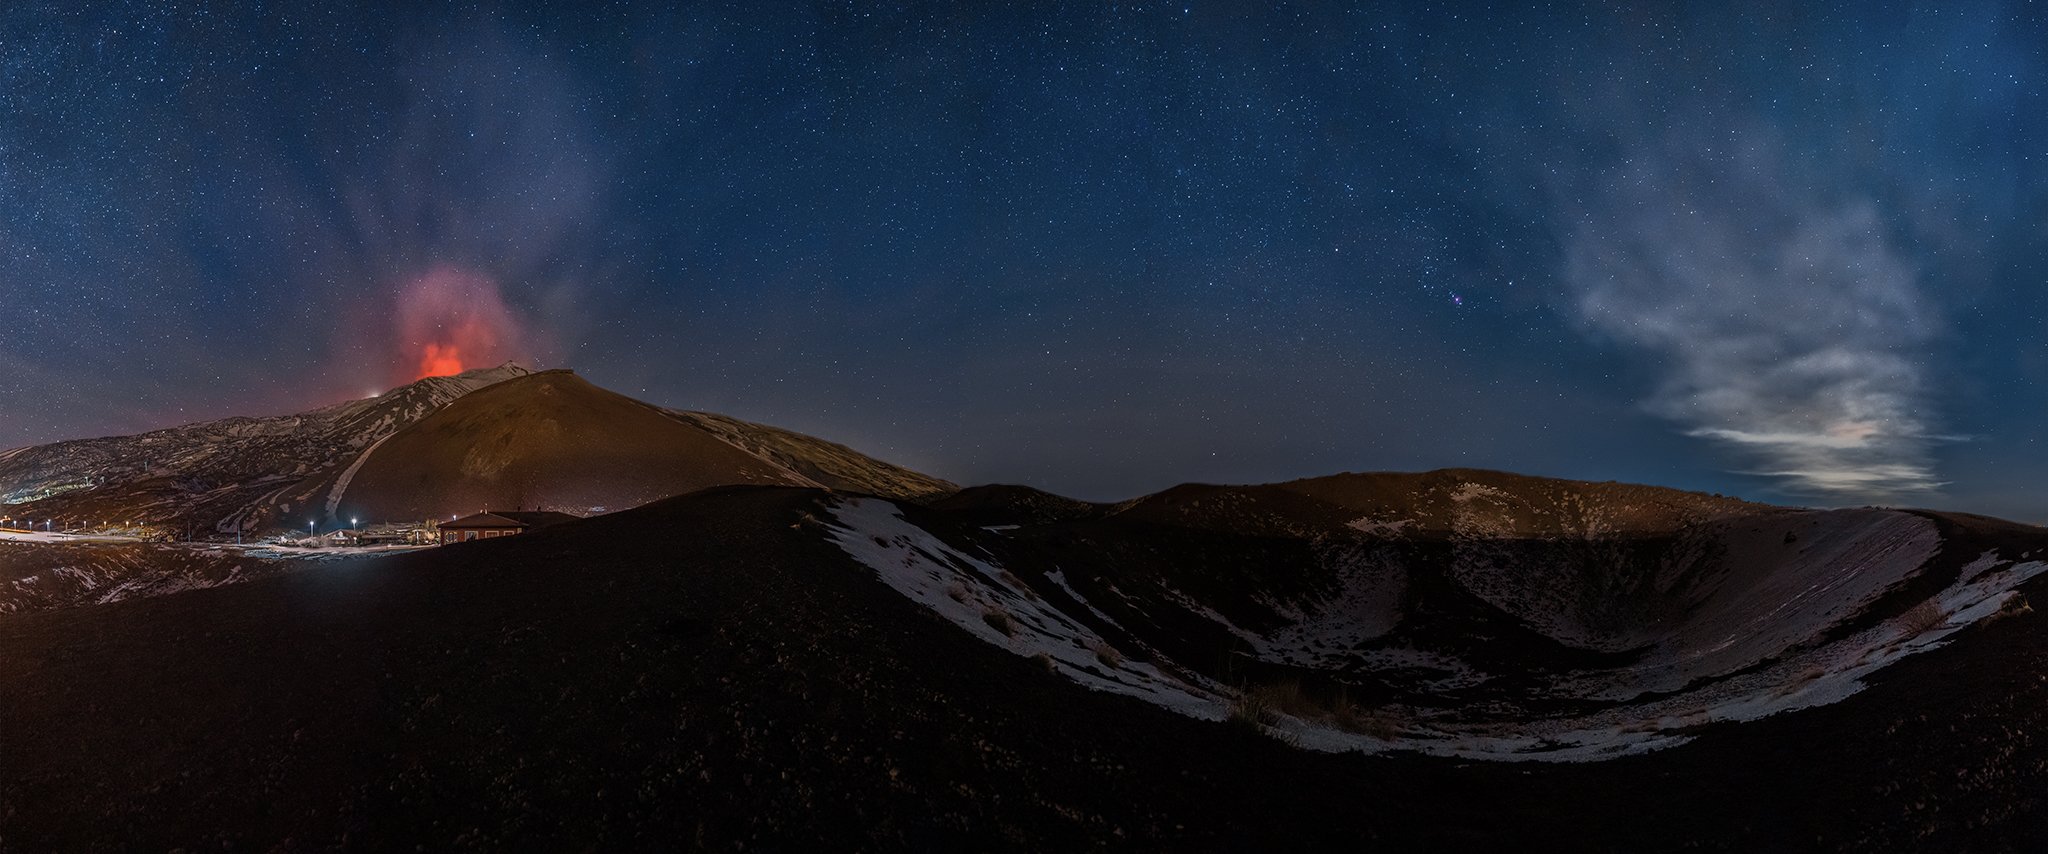 etna,volcano,stars,orion,costellation,eruption,sicily,italy,crater, Massimo Tamajo